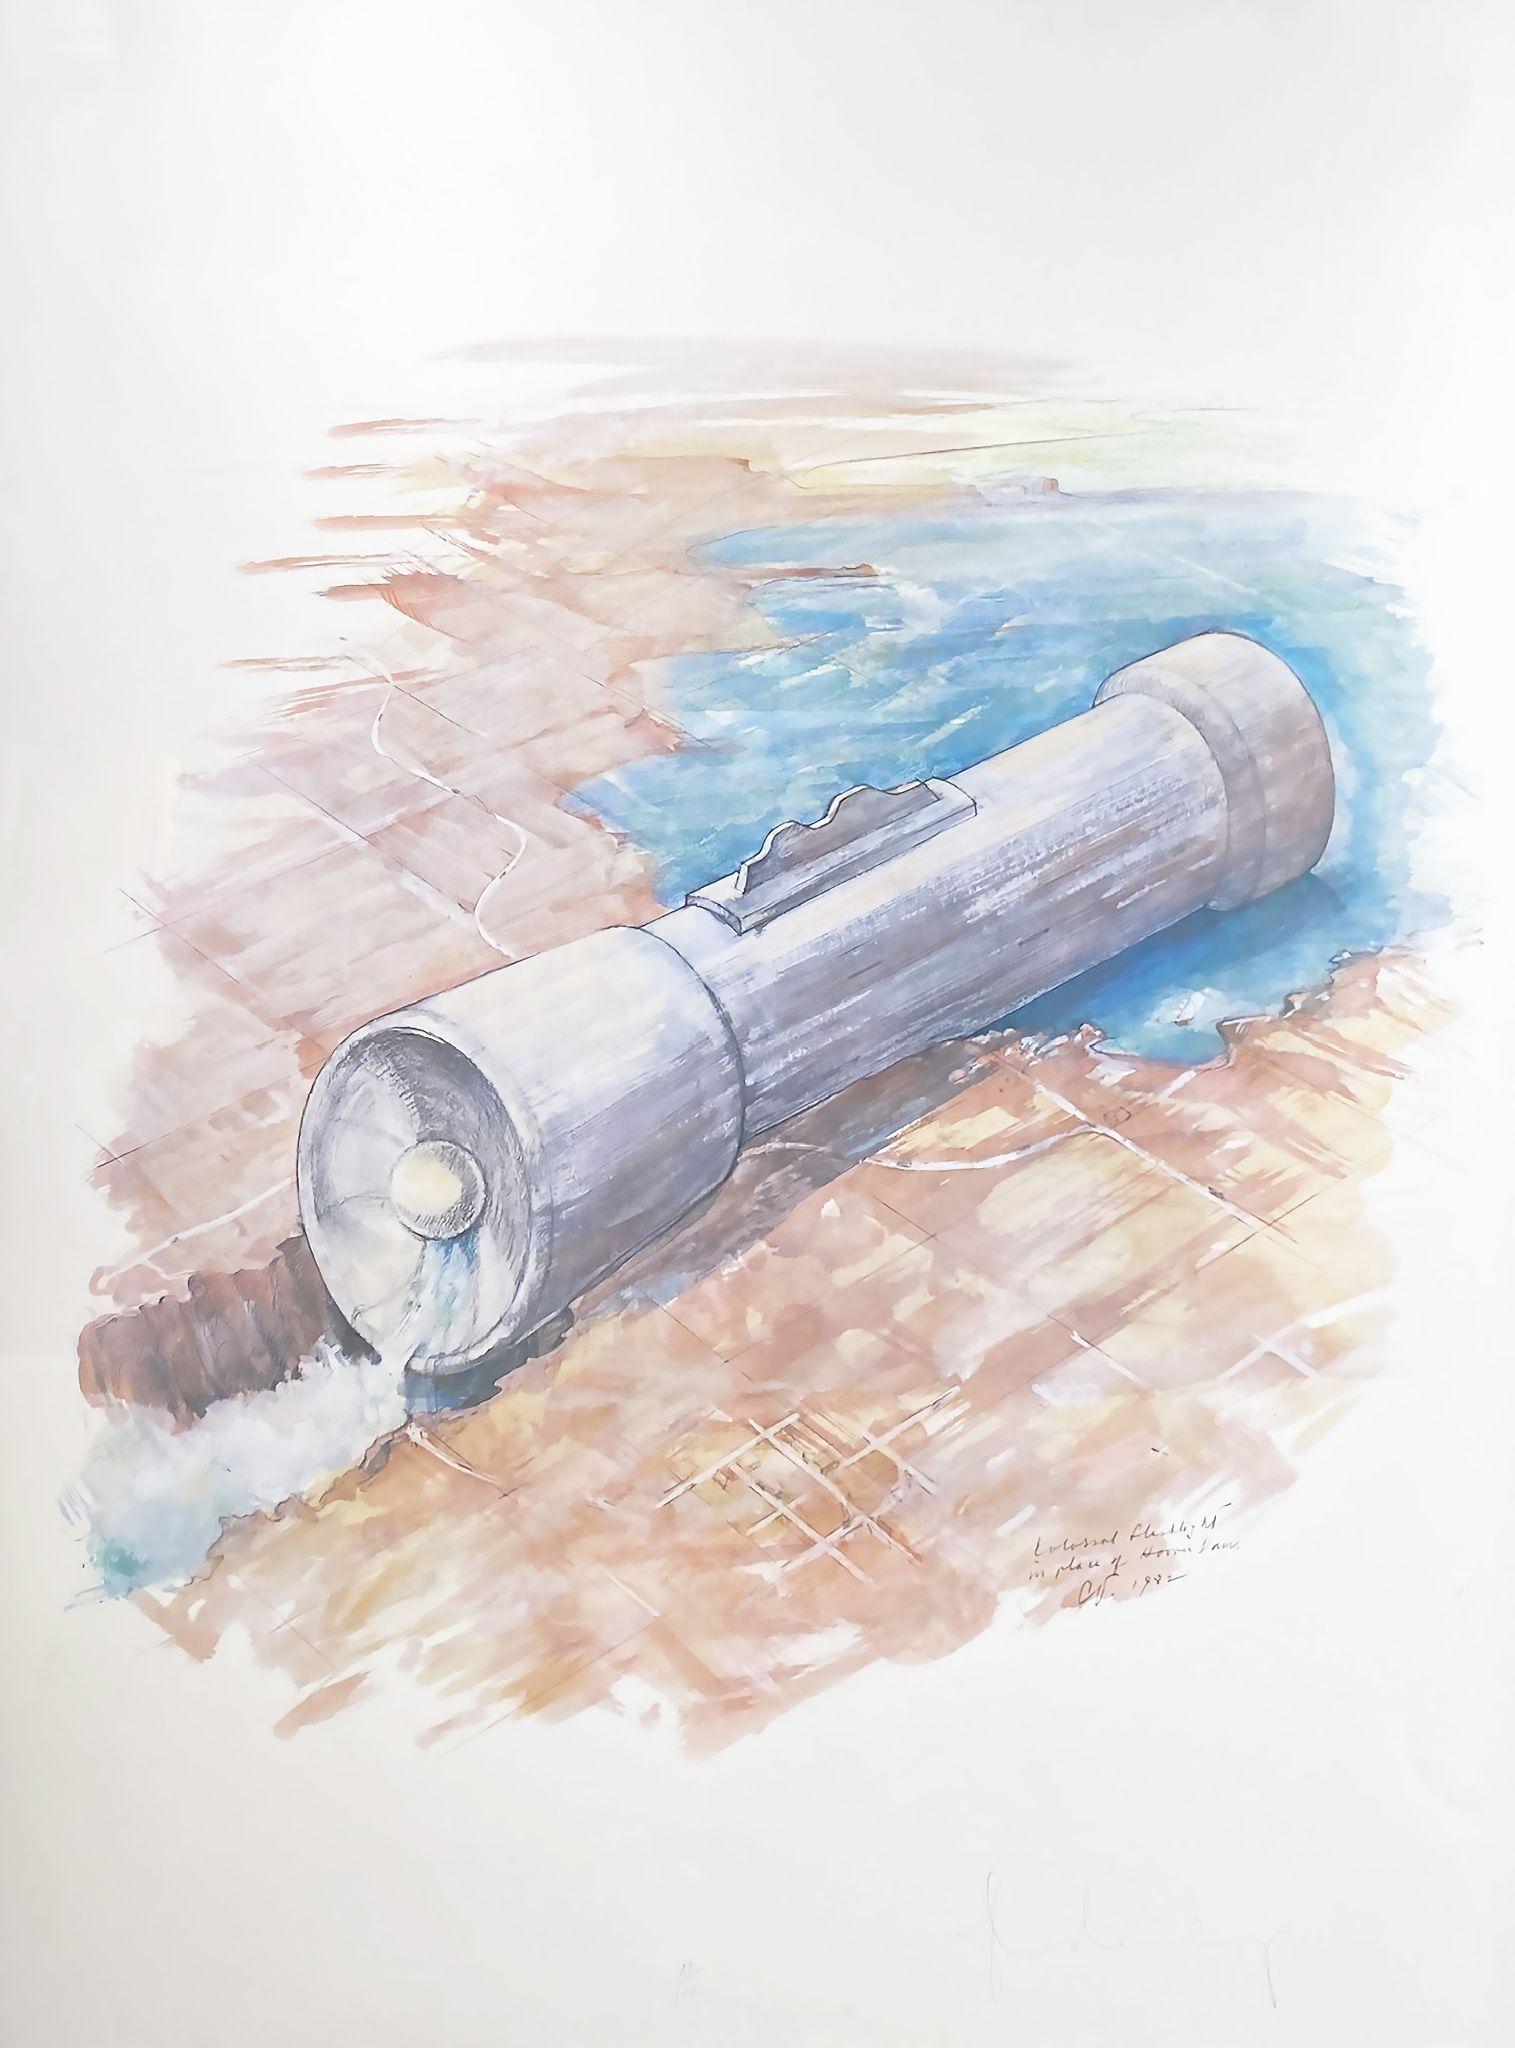 Claes Oldenburg Abstract Print - Colossal Flashlight in Place of Hoover Dam